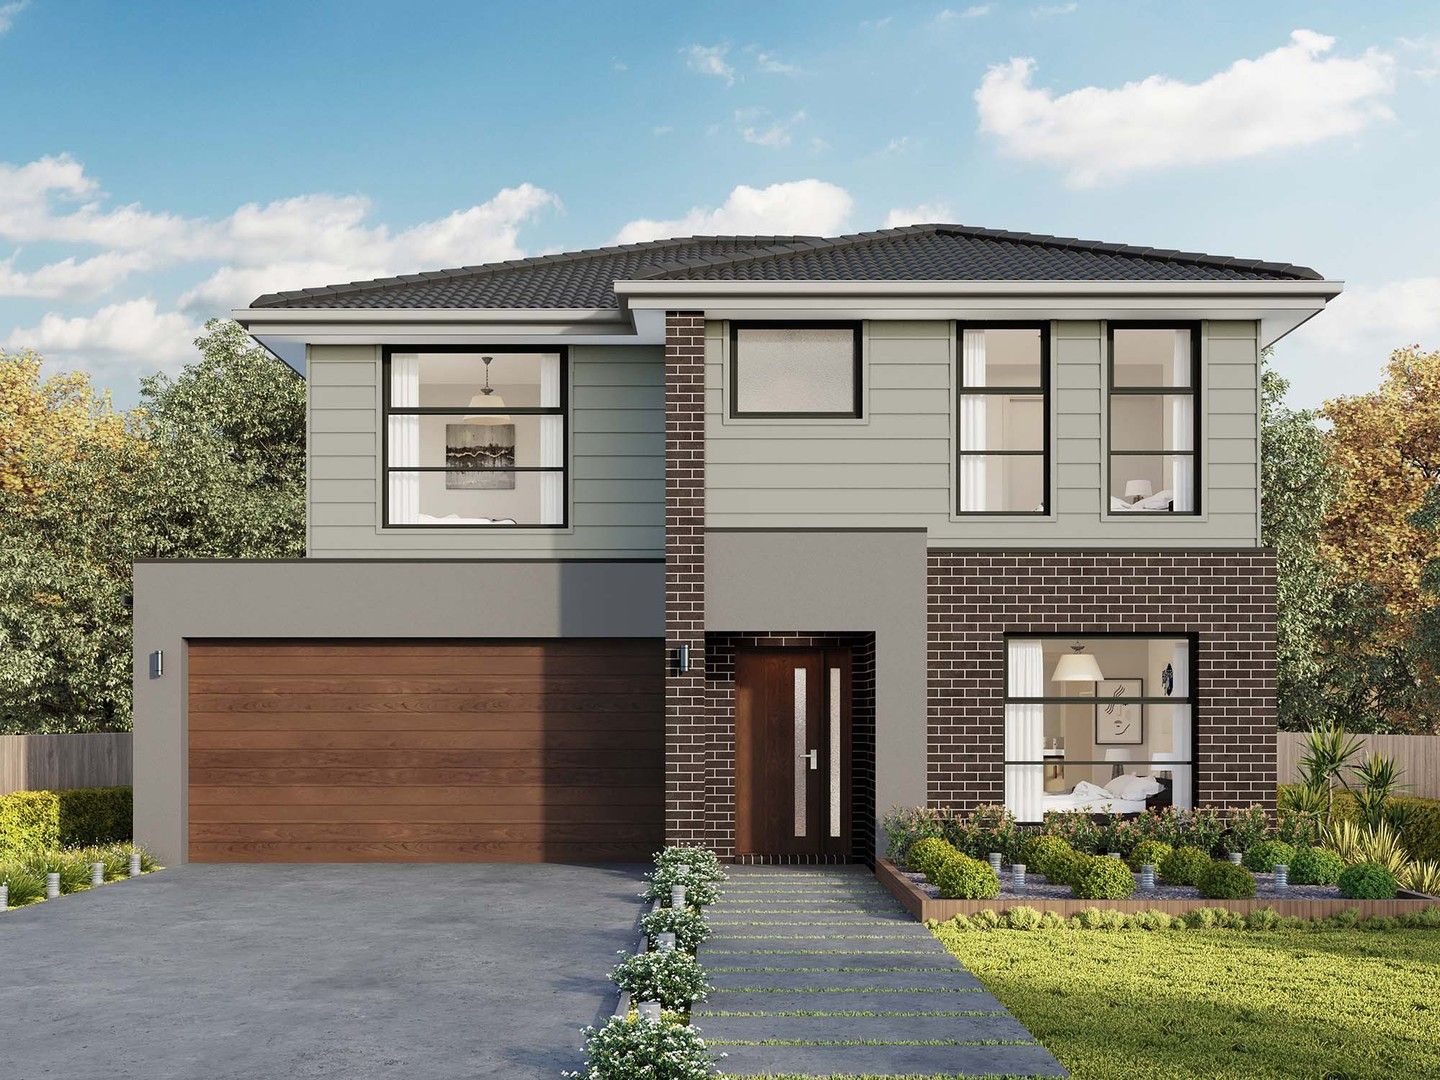 4 bedrooms New House & Land in Lot 31 Proposed Dr ULLADULLA NSW, 2539